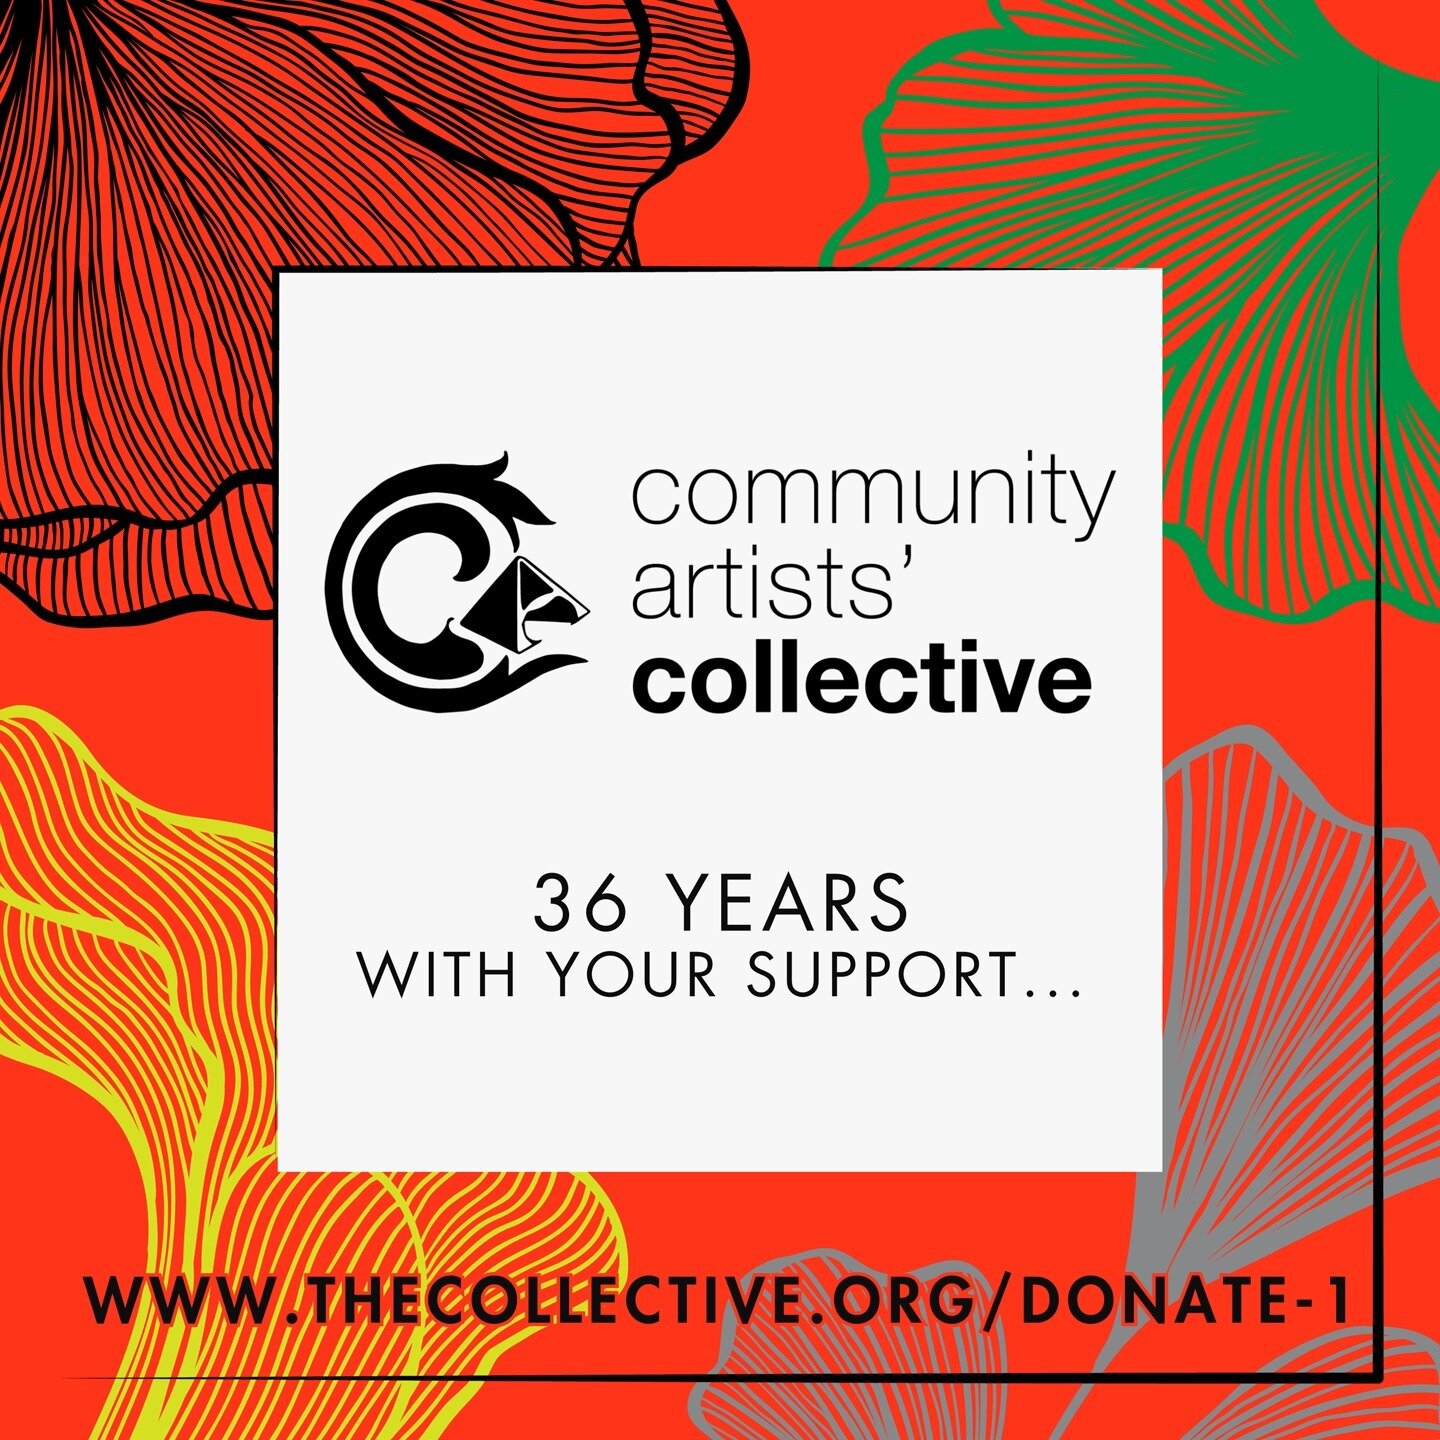 Dear Friends,
The year 2023 marks 36 years since the Community Artists&rsquo; Collective began providing services to the Houston community through the arts. Your continued support has been the force behind our success and impact, and we are deeply gr